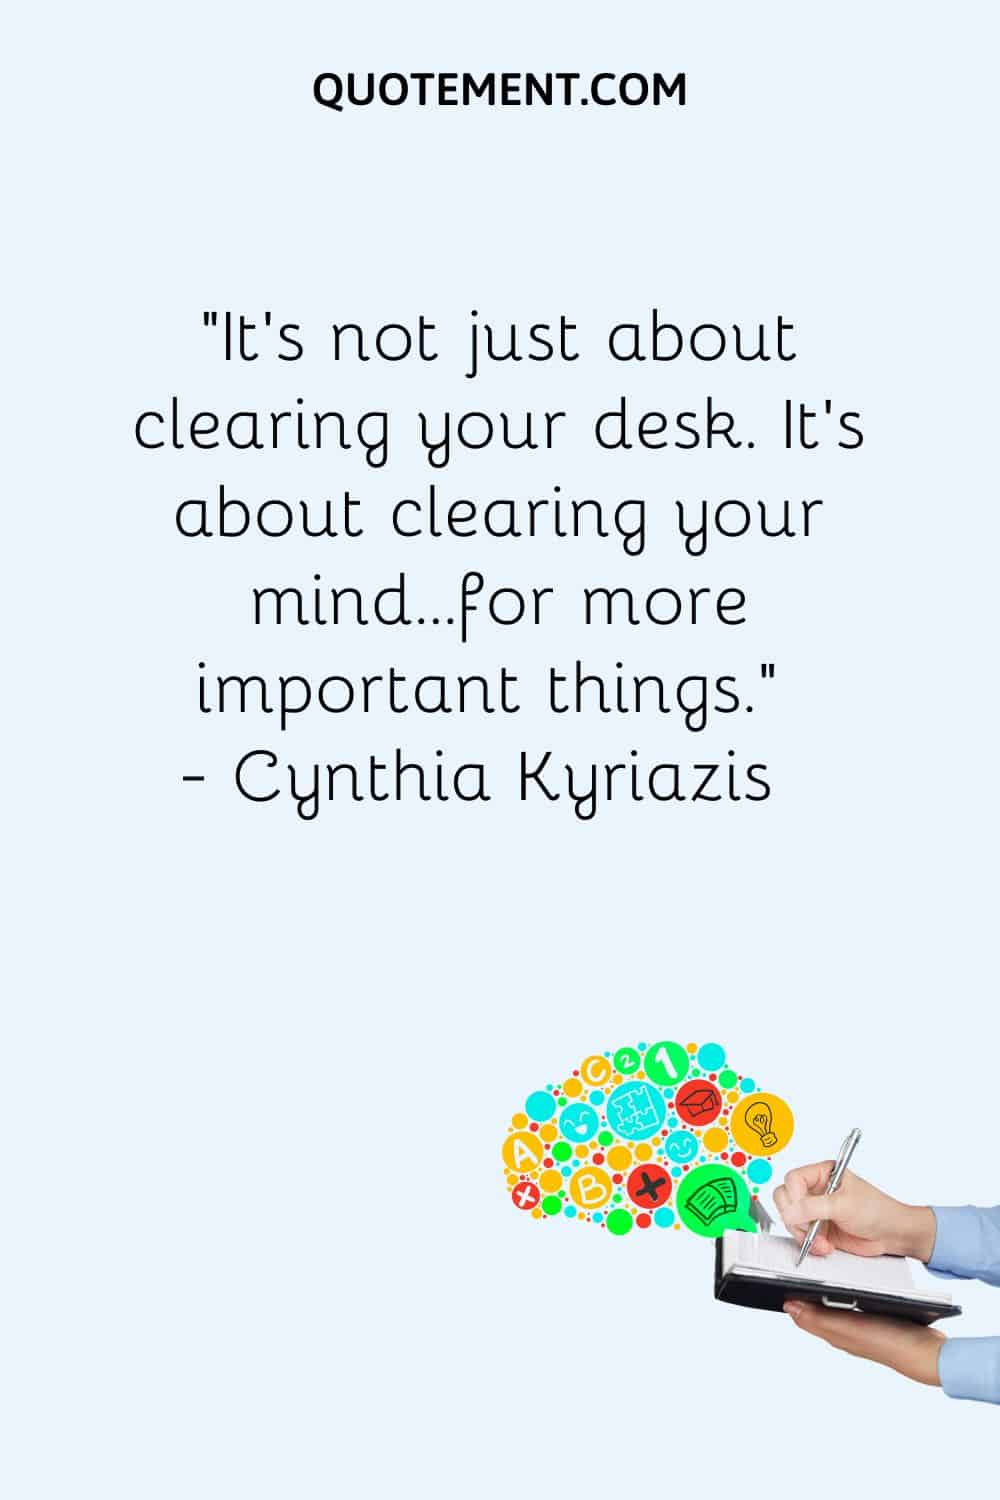 It’s not just about clearing your desk. It’s about clearing your mind…for more important things